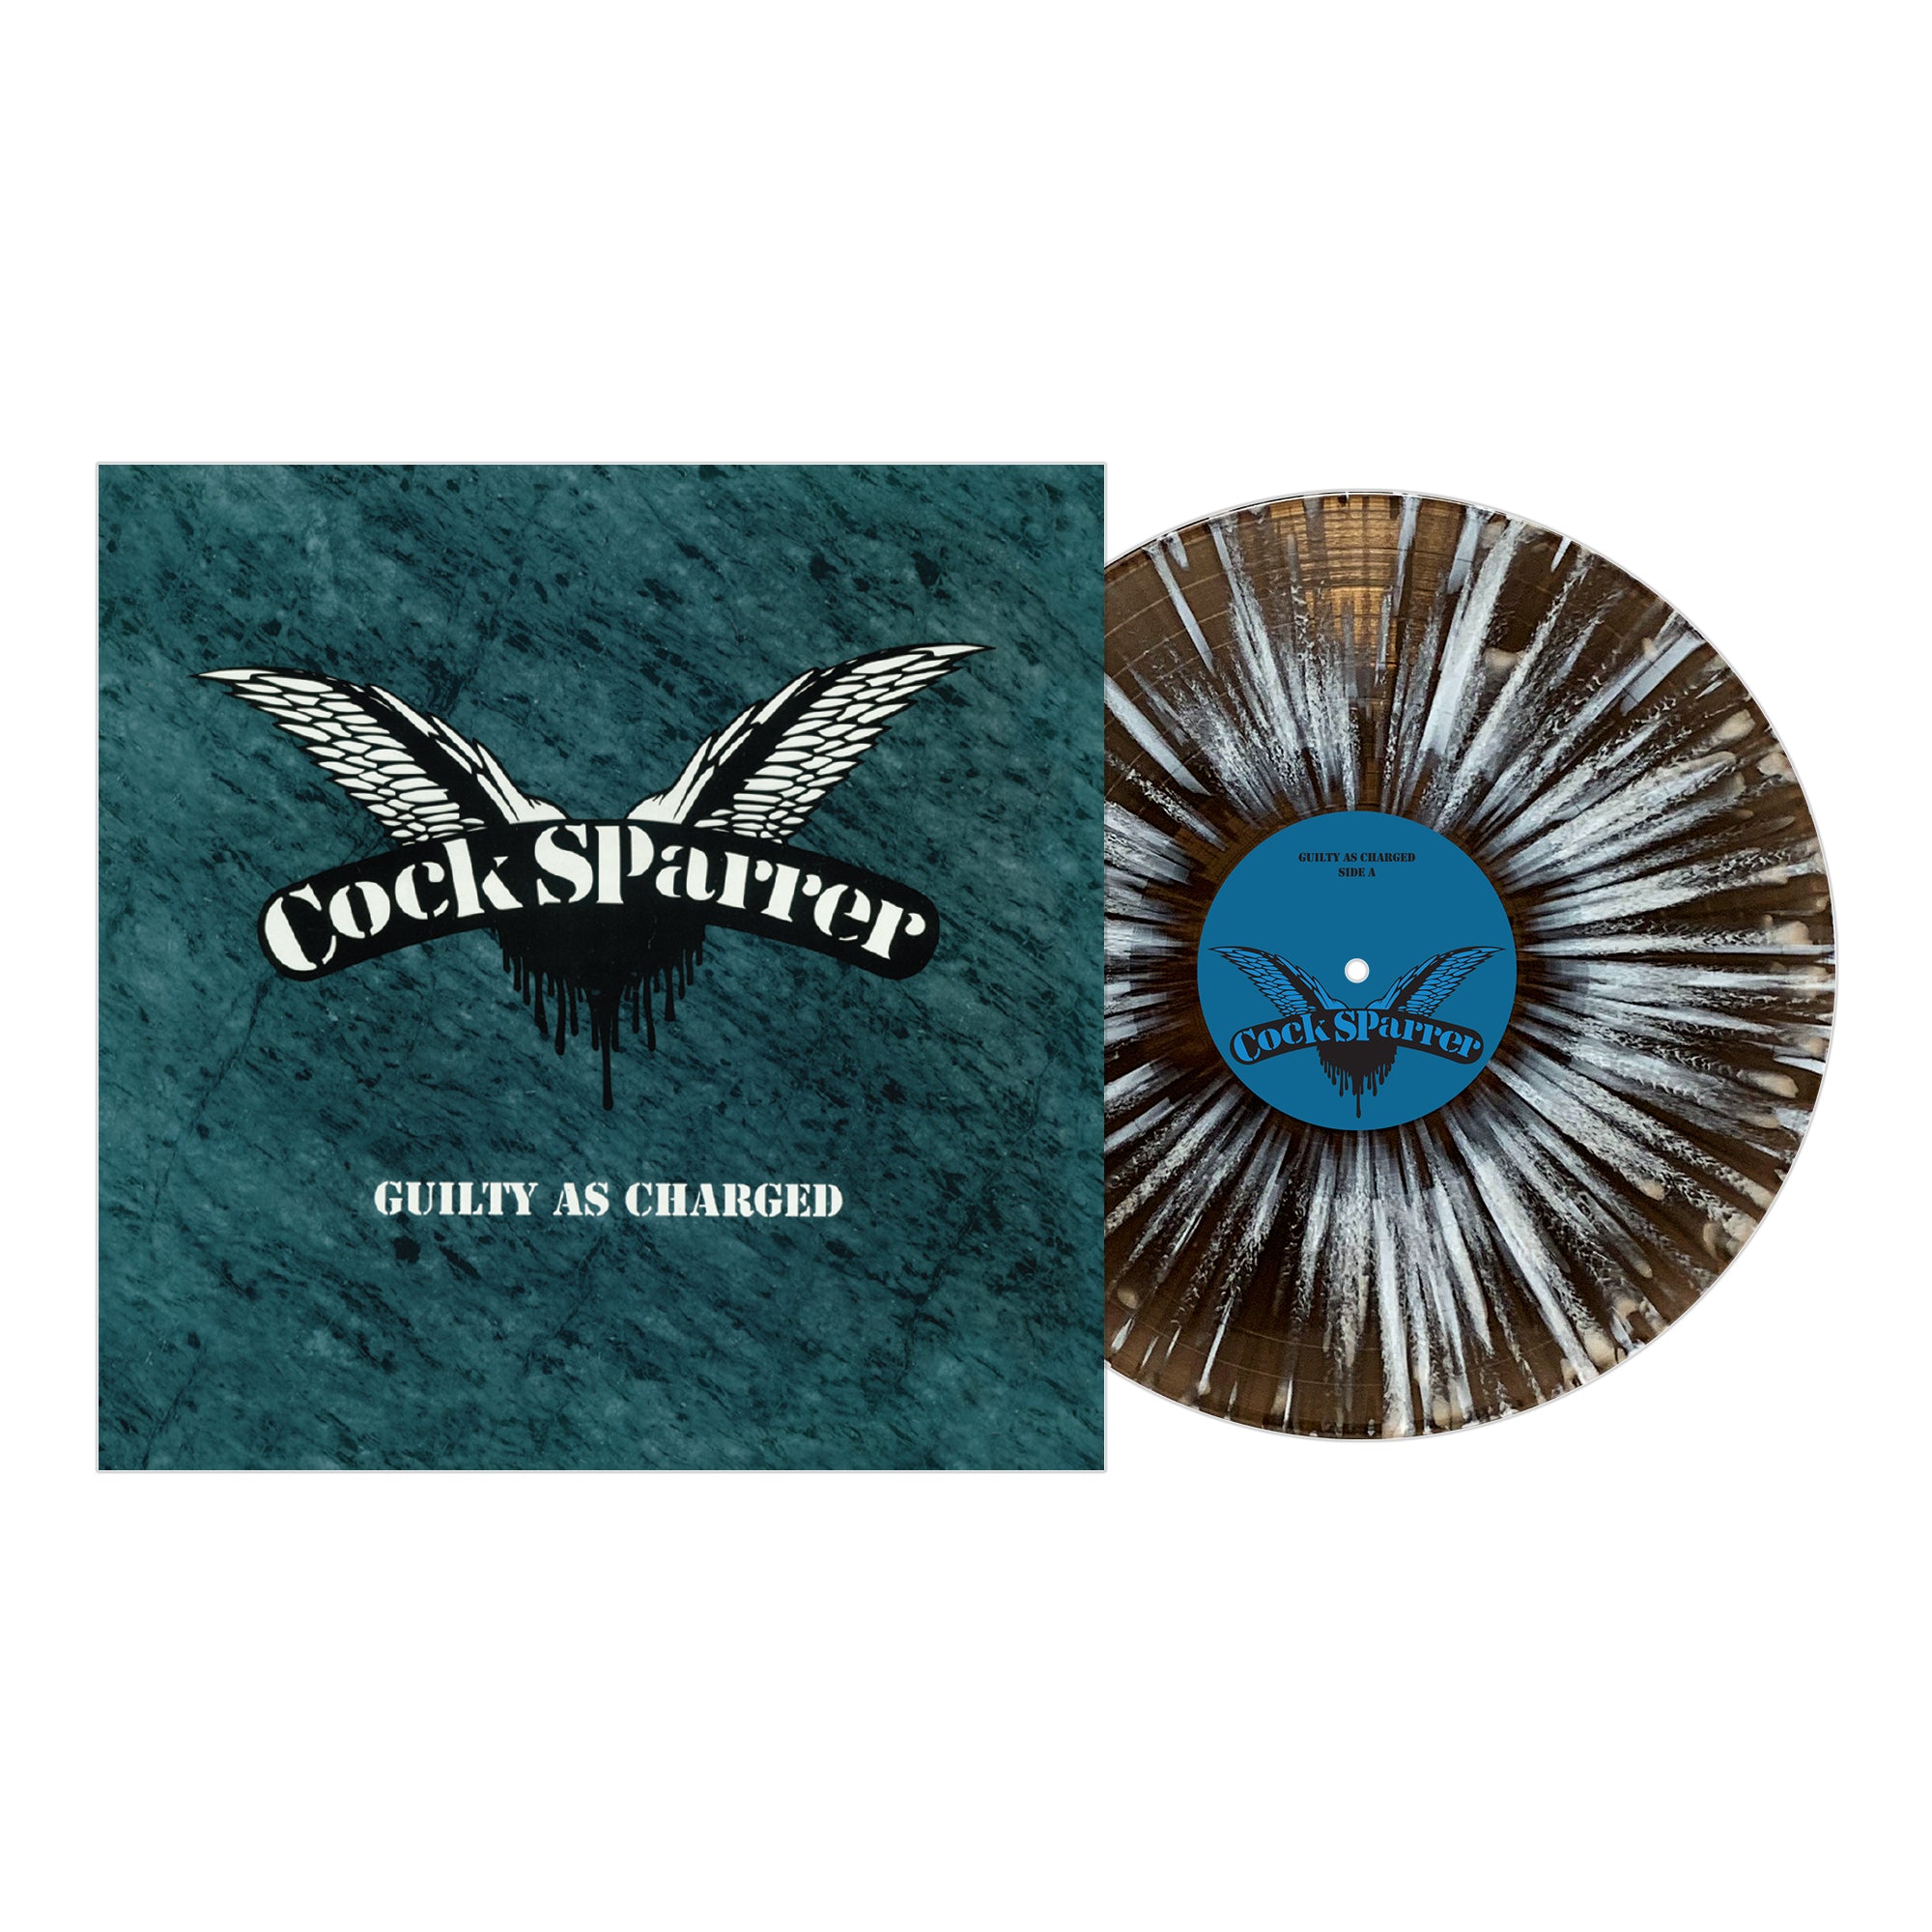 Cock Sparrer - Guilty As Charged - Black Ice w/ White Splatter - Vinyl LP